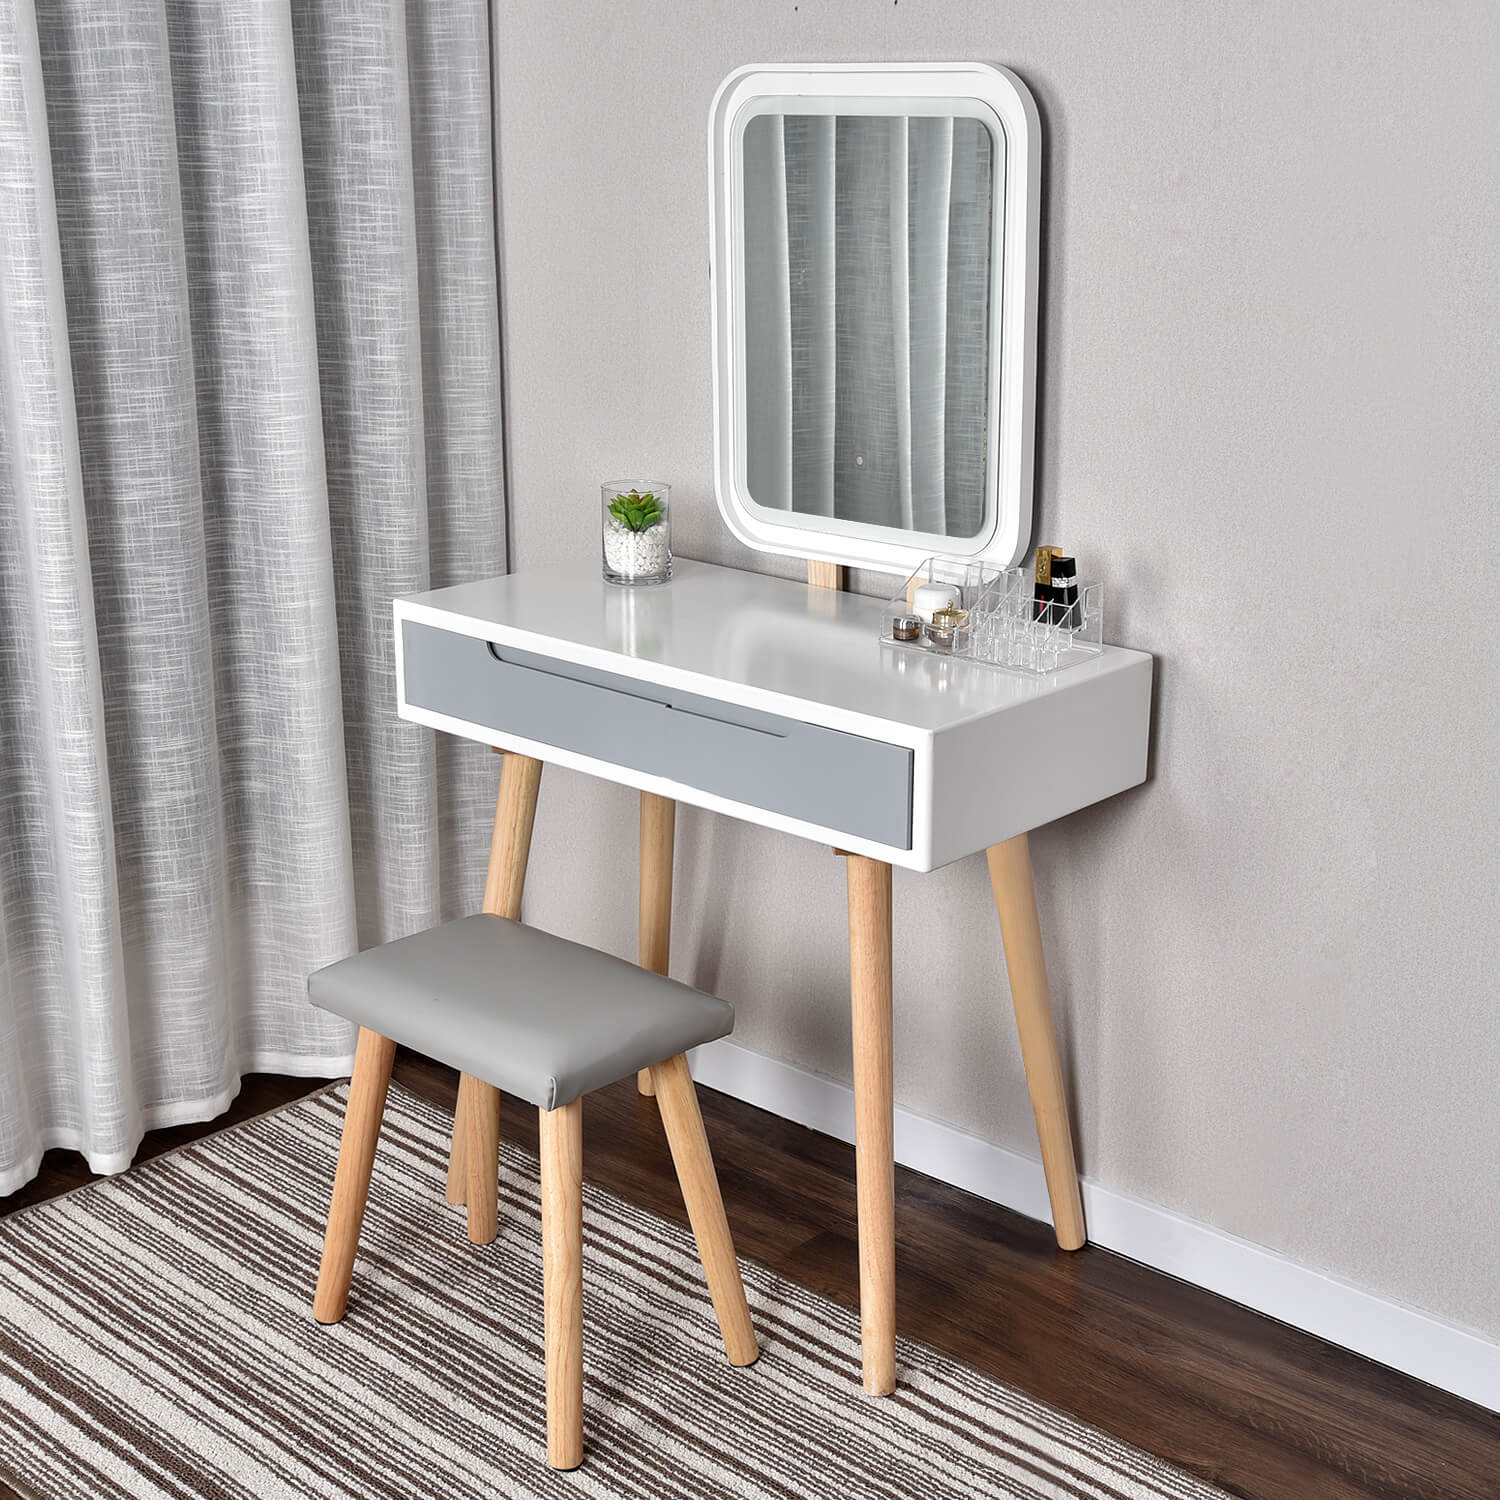 Elecwish makeup dressing table set with square mirror is suitable for bedroom